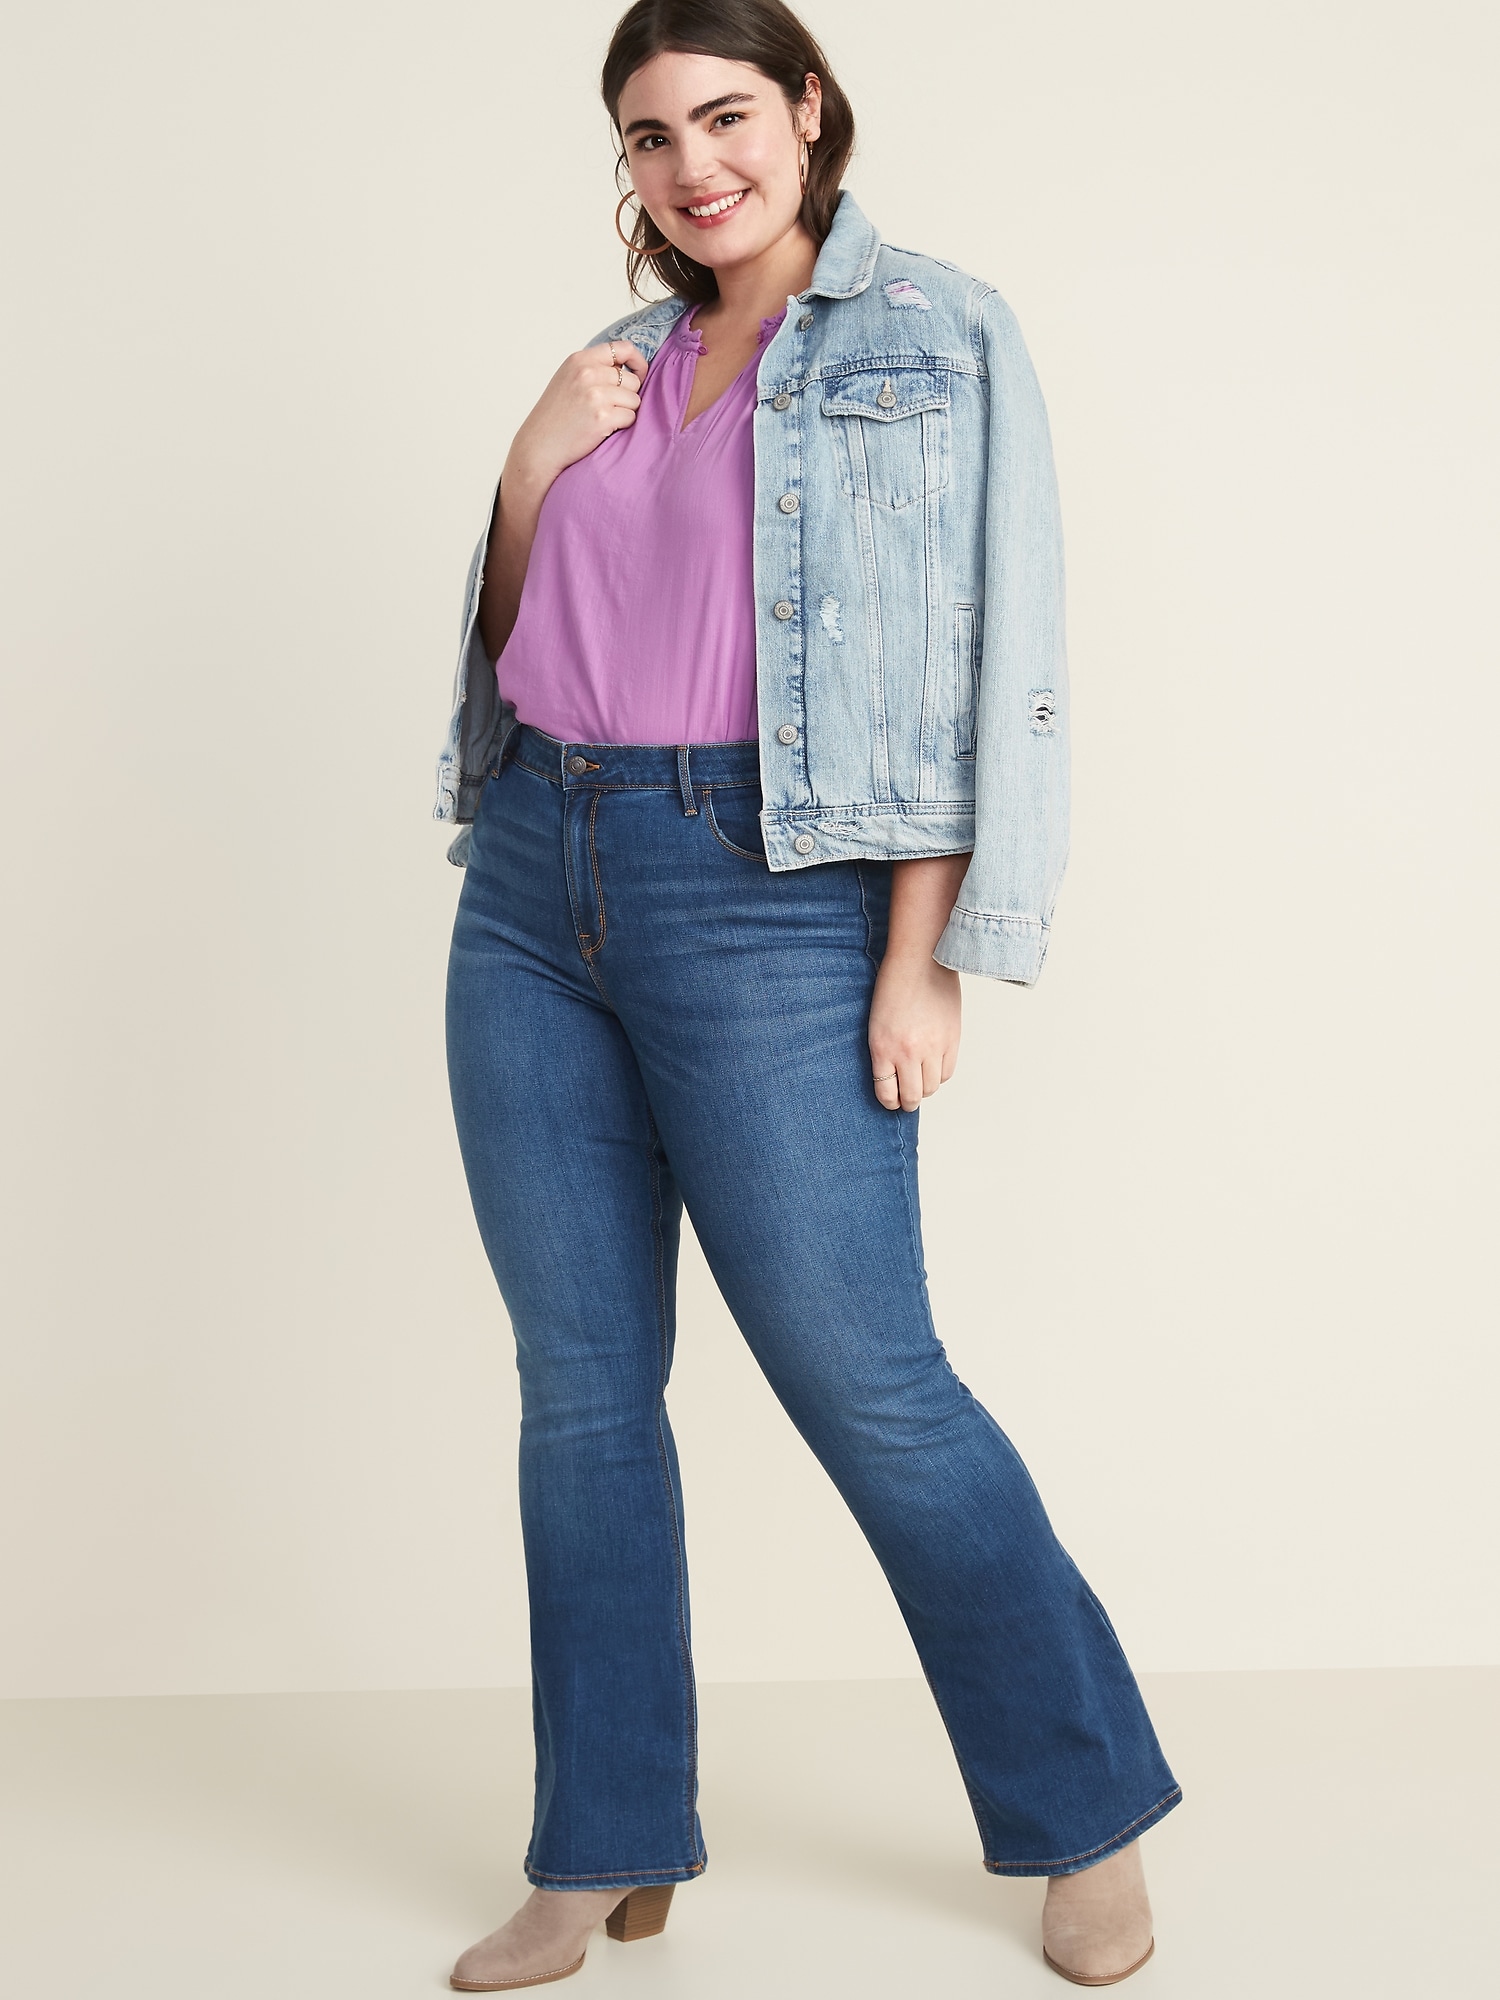 old navy mid rise micro flare jeans